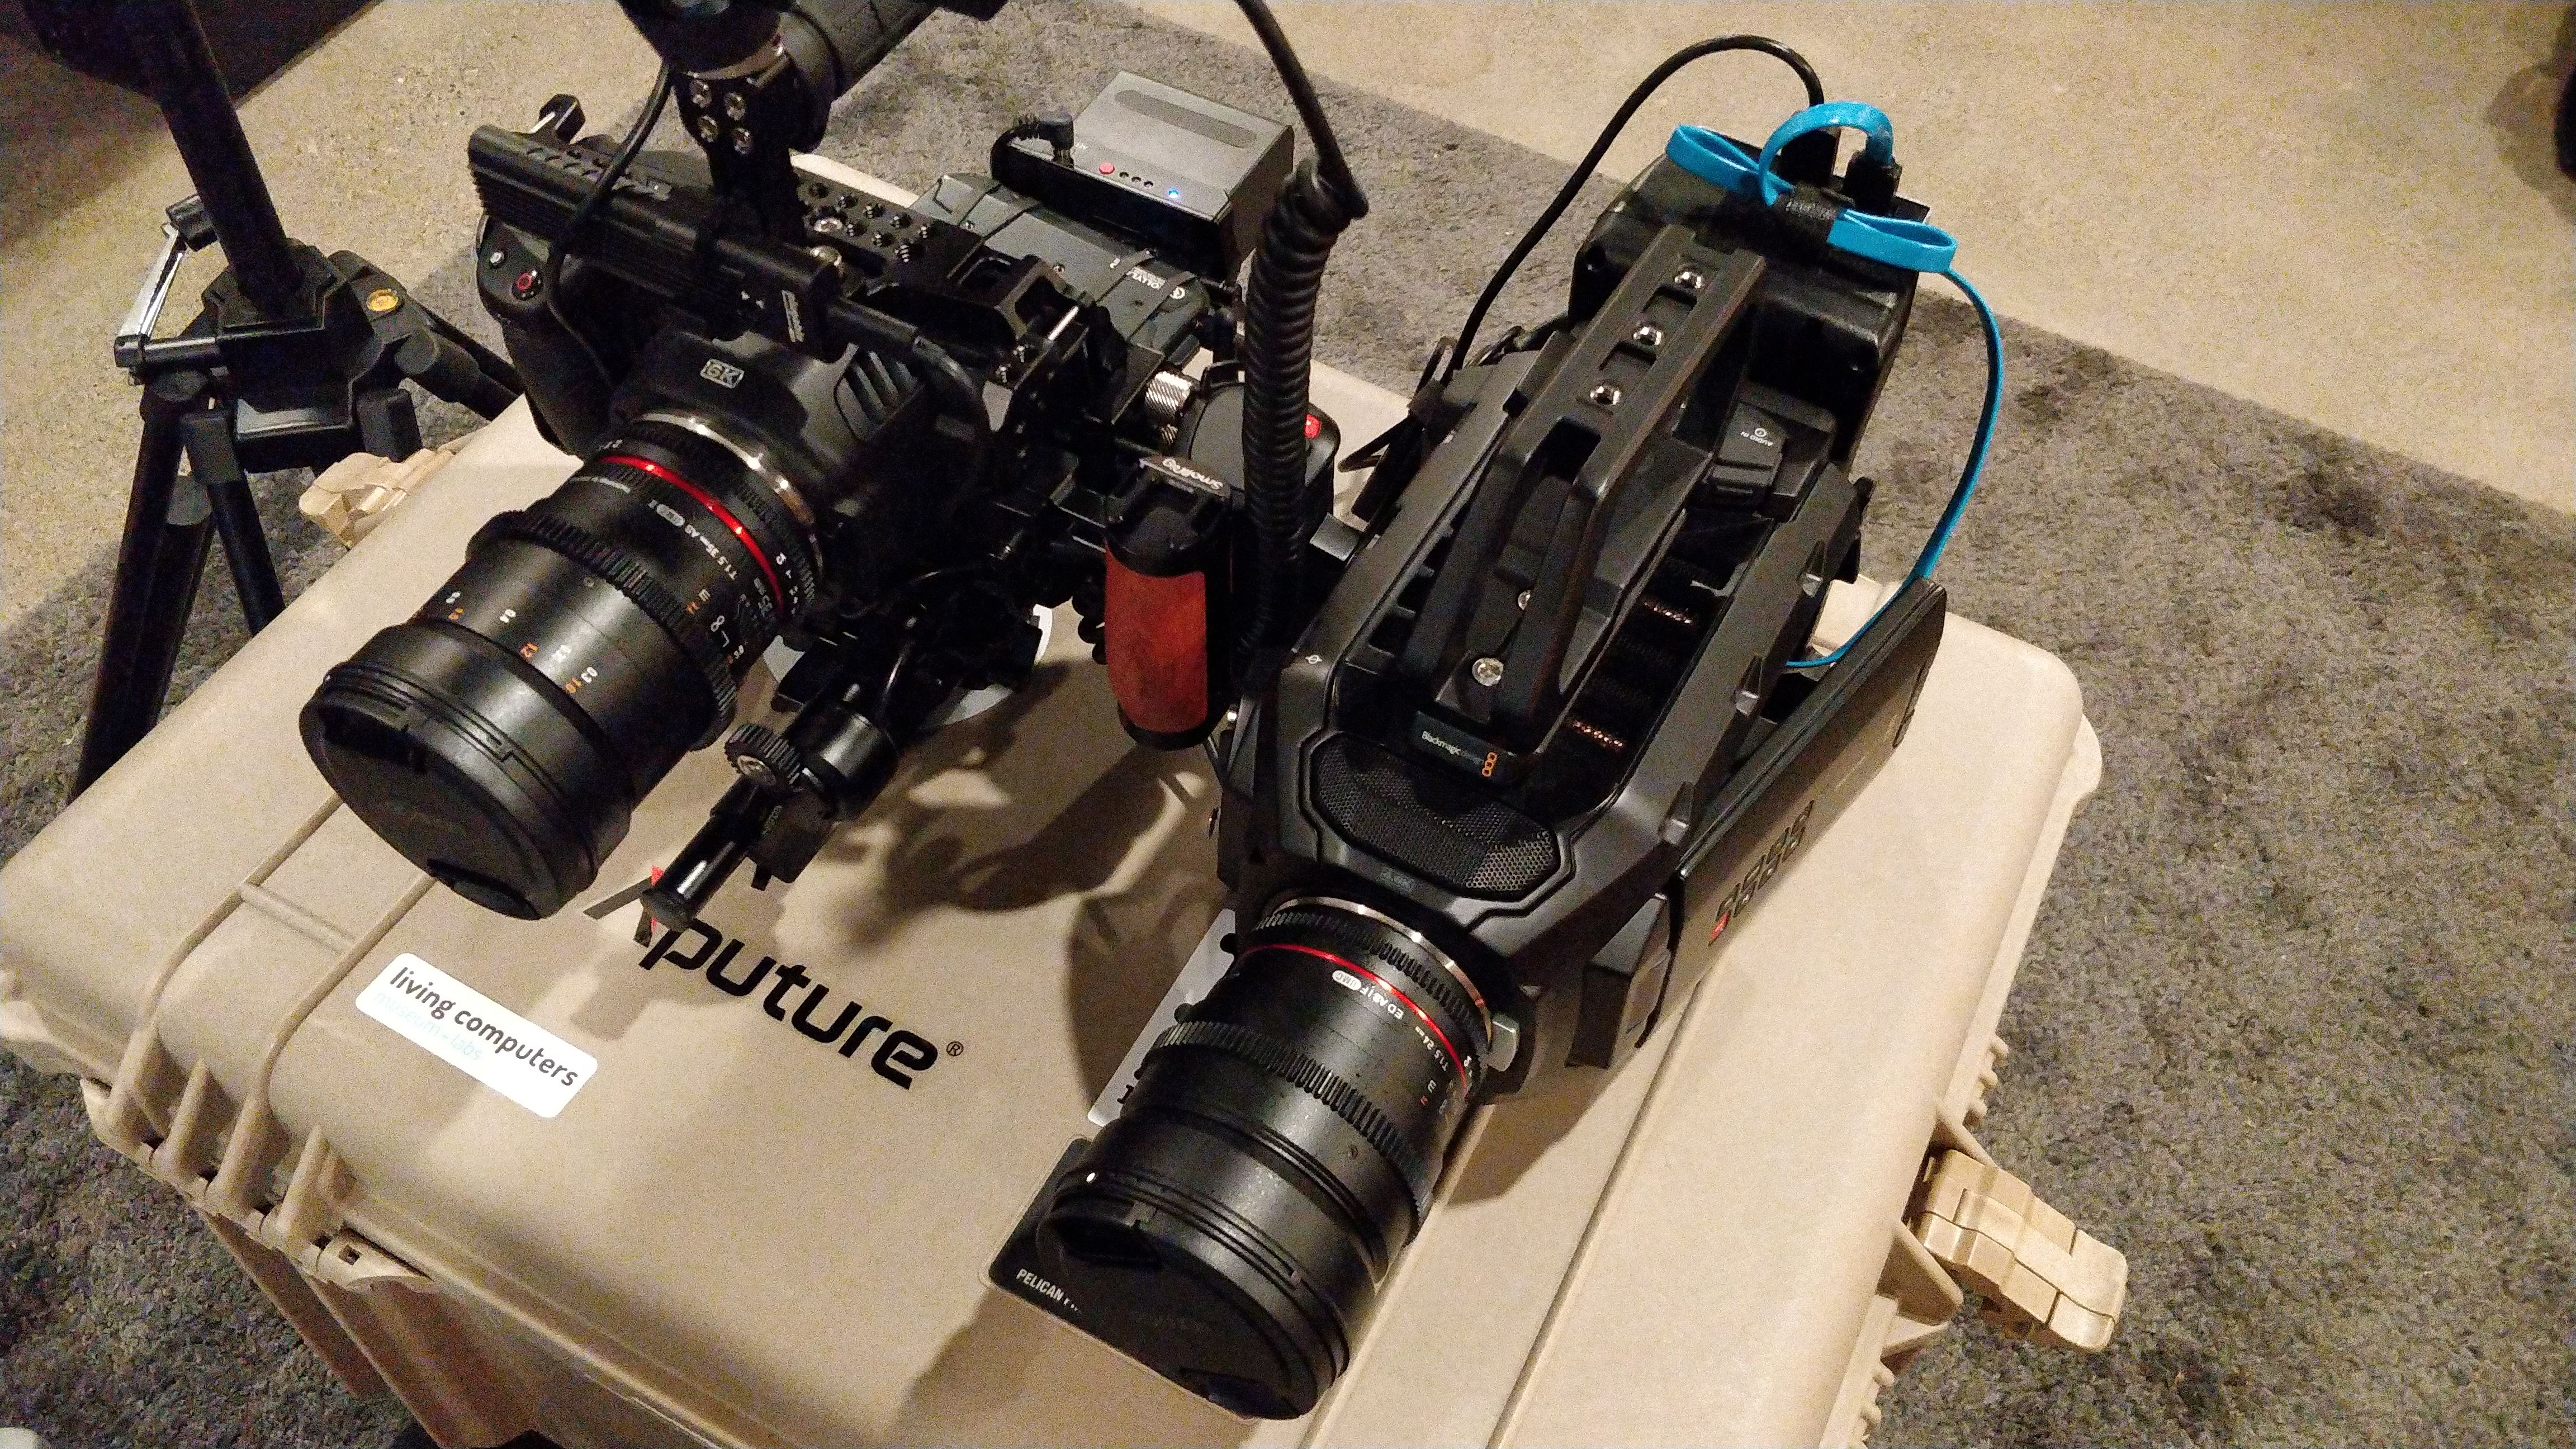 Two cameras (mine on the left, Russell's on the right)